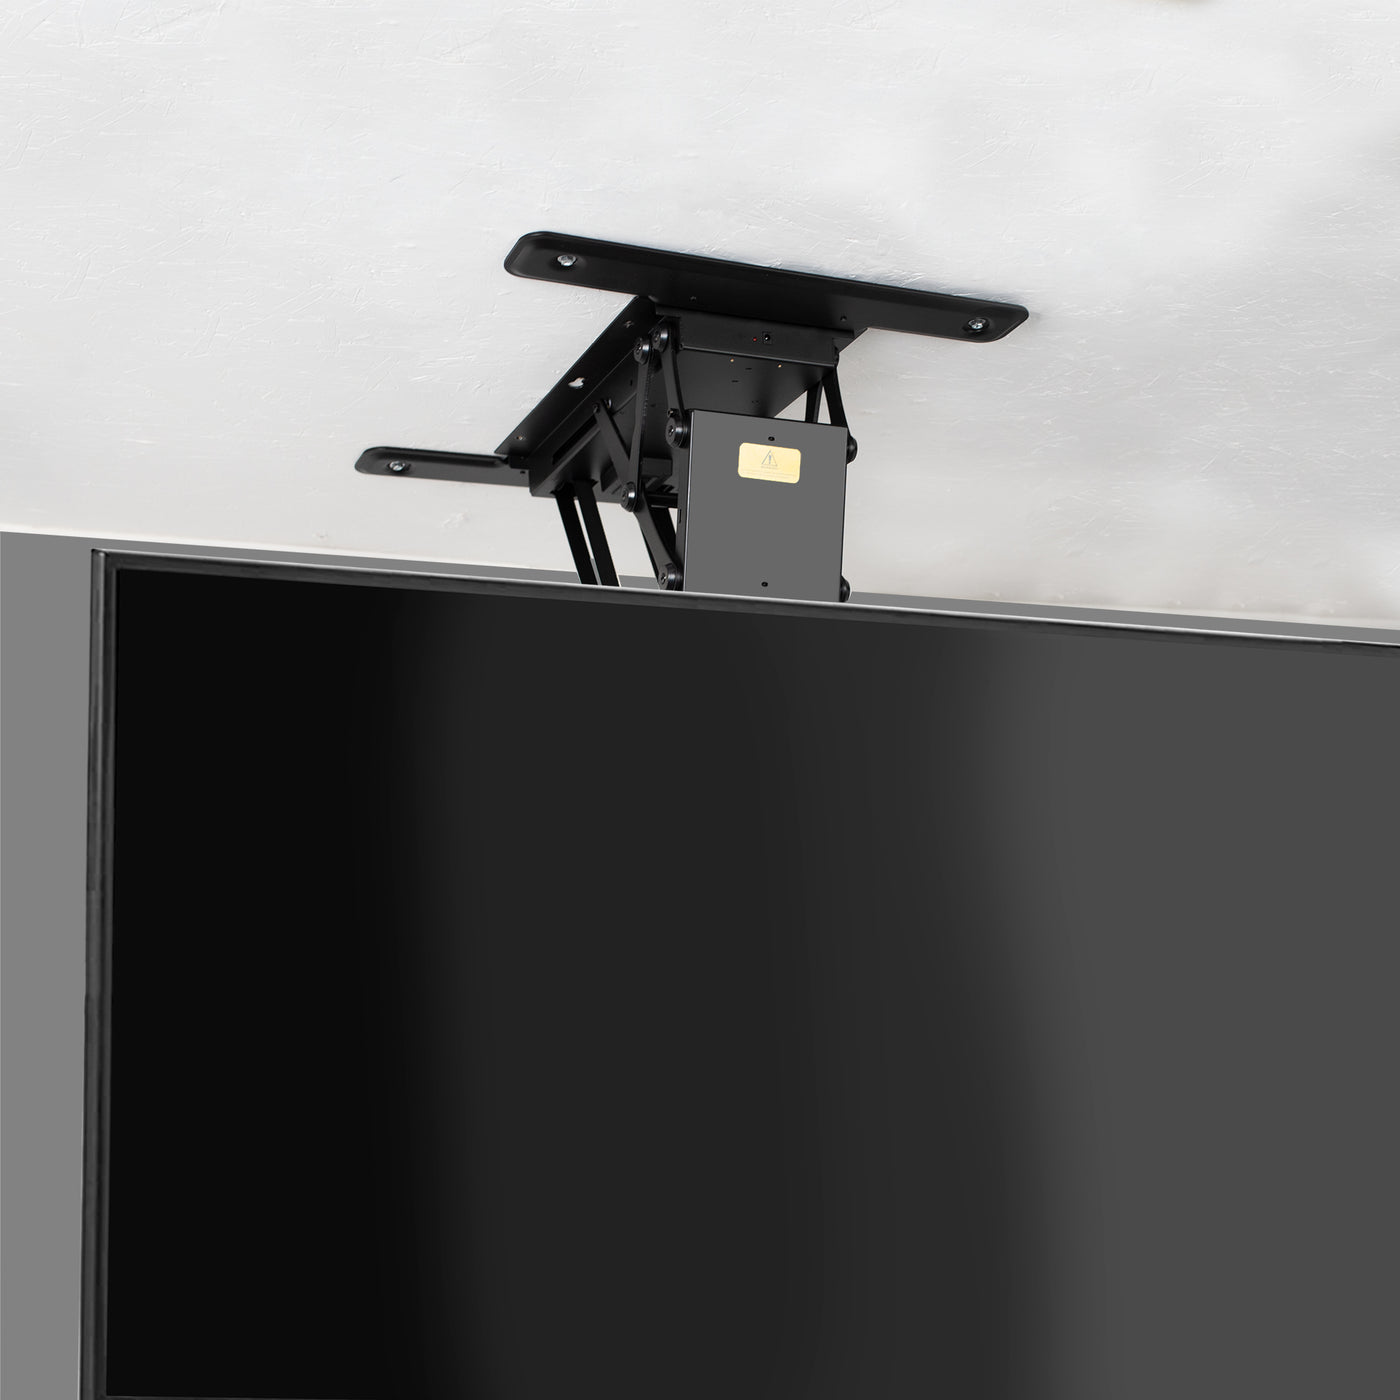 Electric Flip Down Ceiling TV Mount holds large TV's and features dual motors for effortless adjustment.